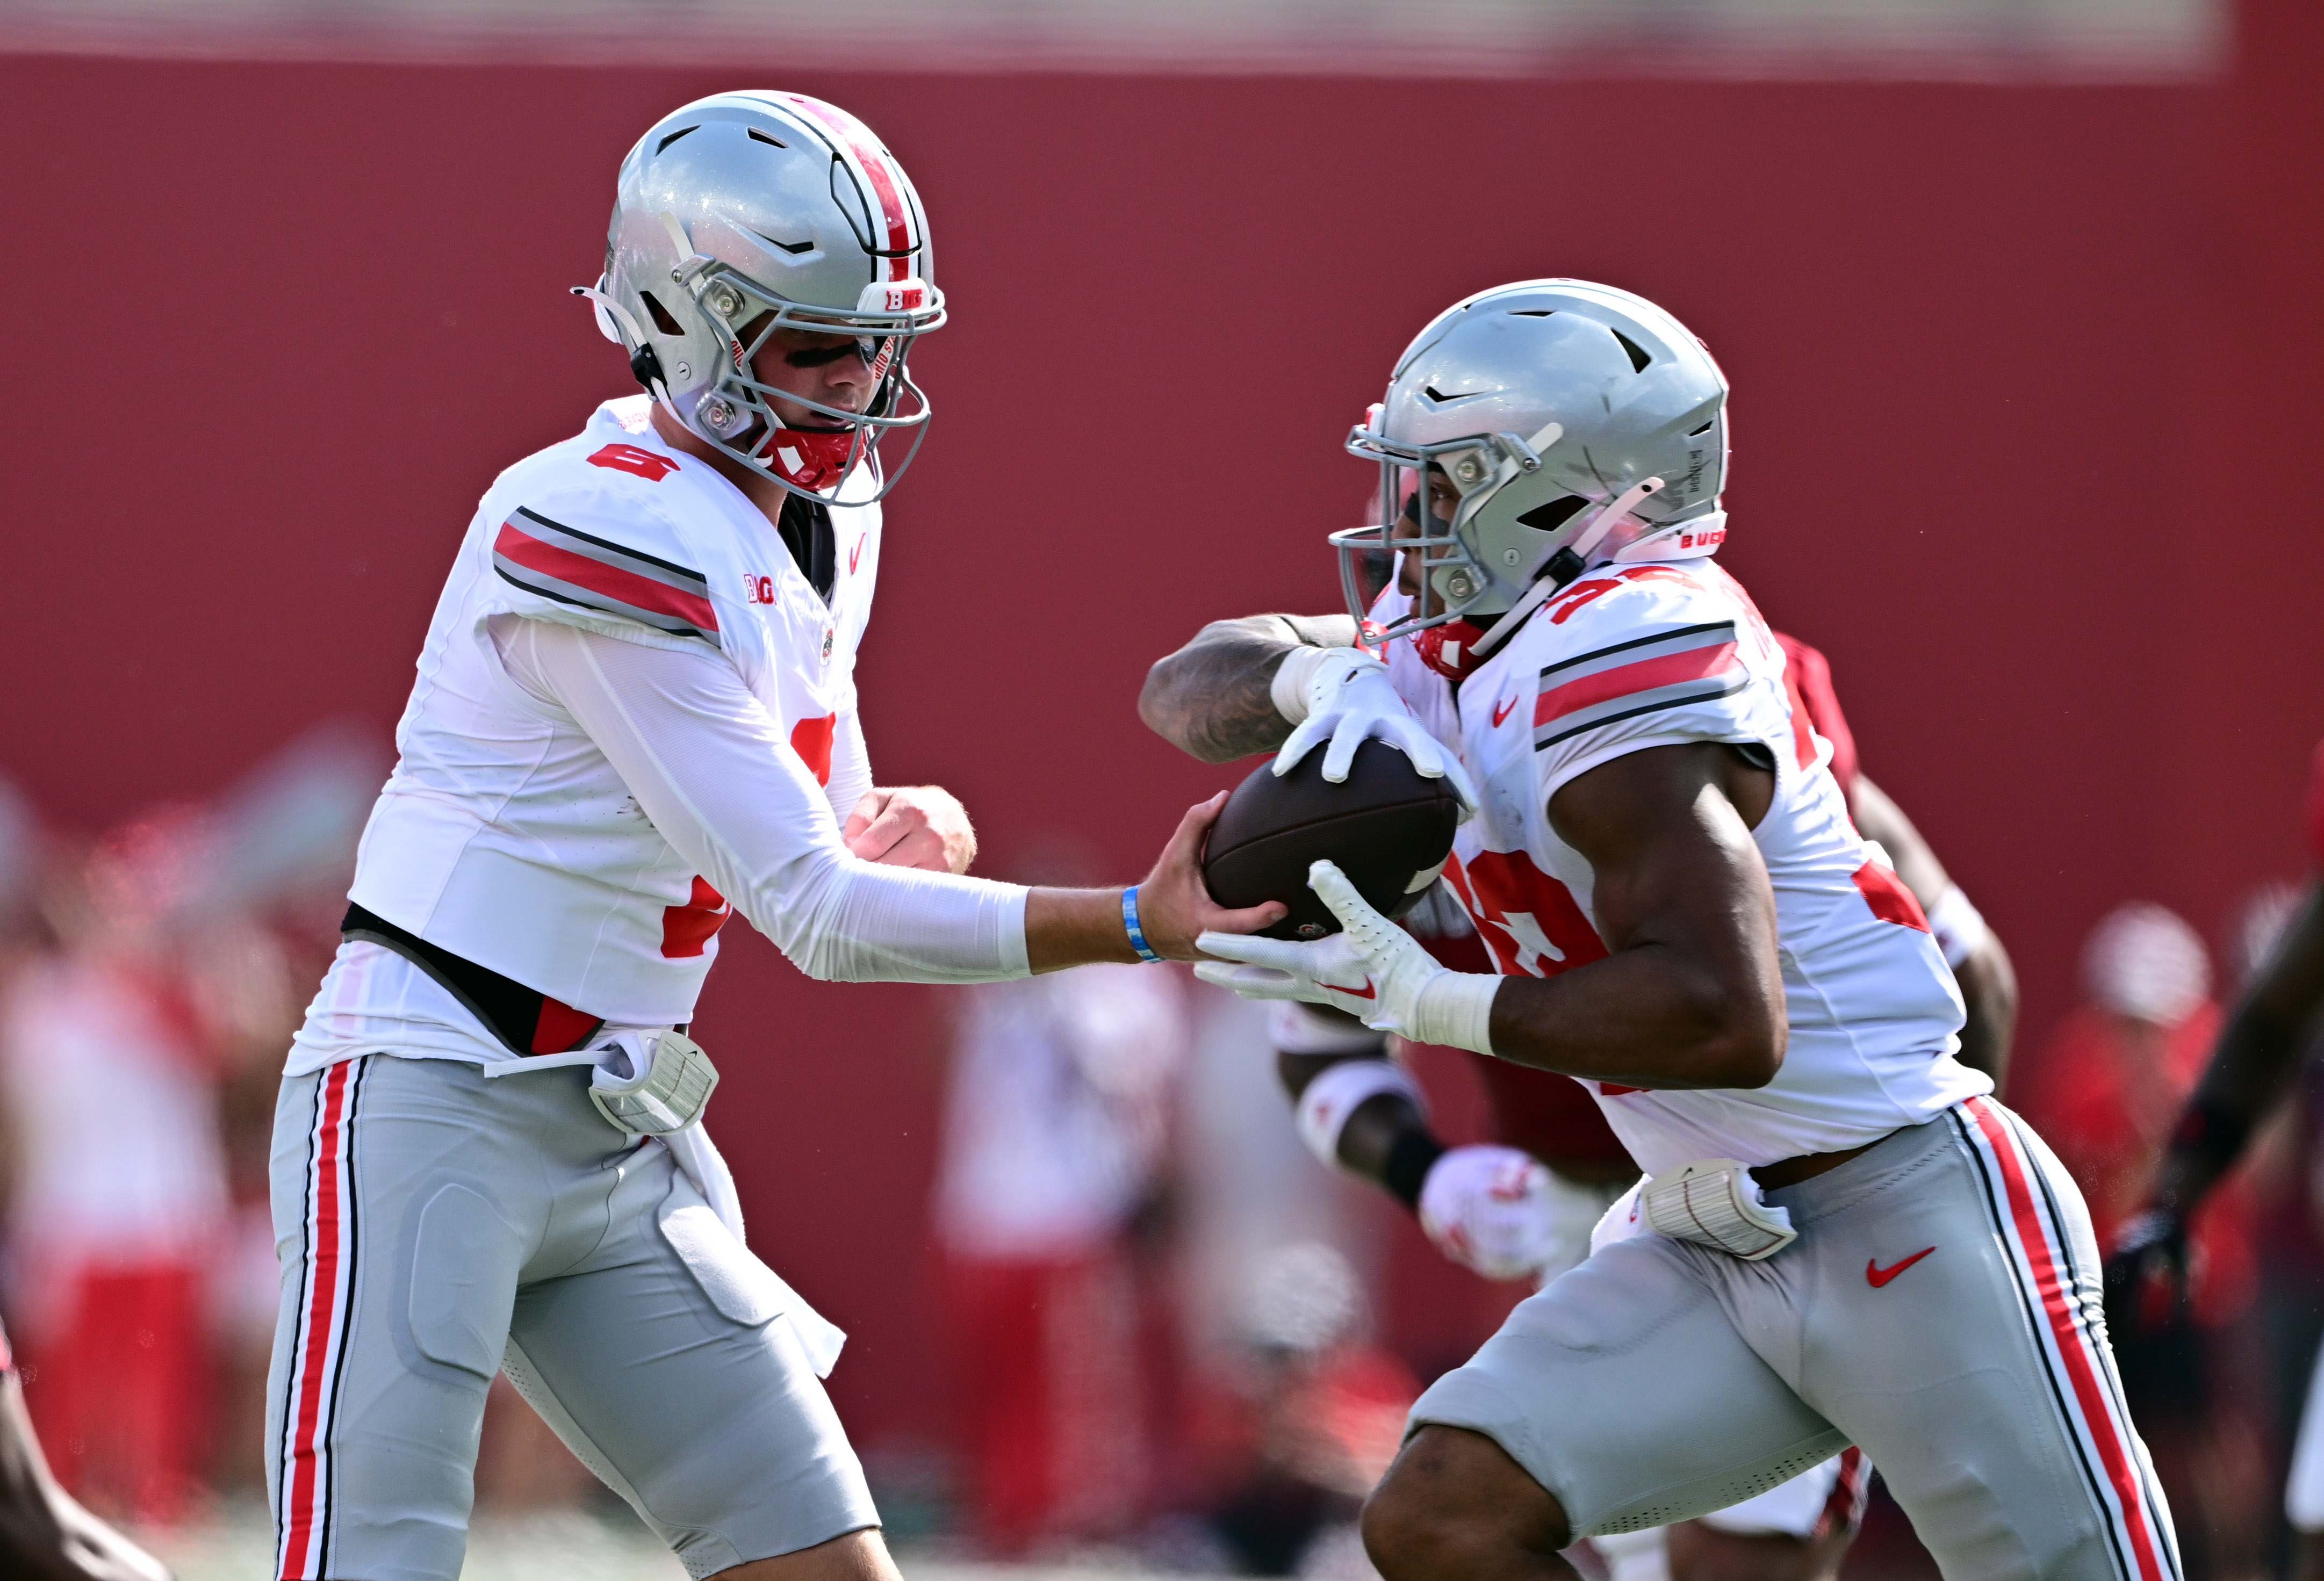 How To Watch The Maryland Terrapins vs Ohio State Buckeyes